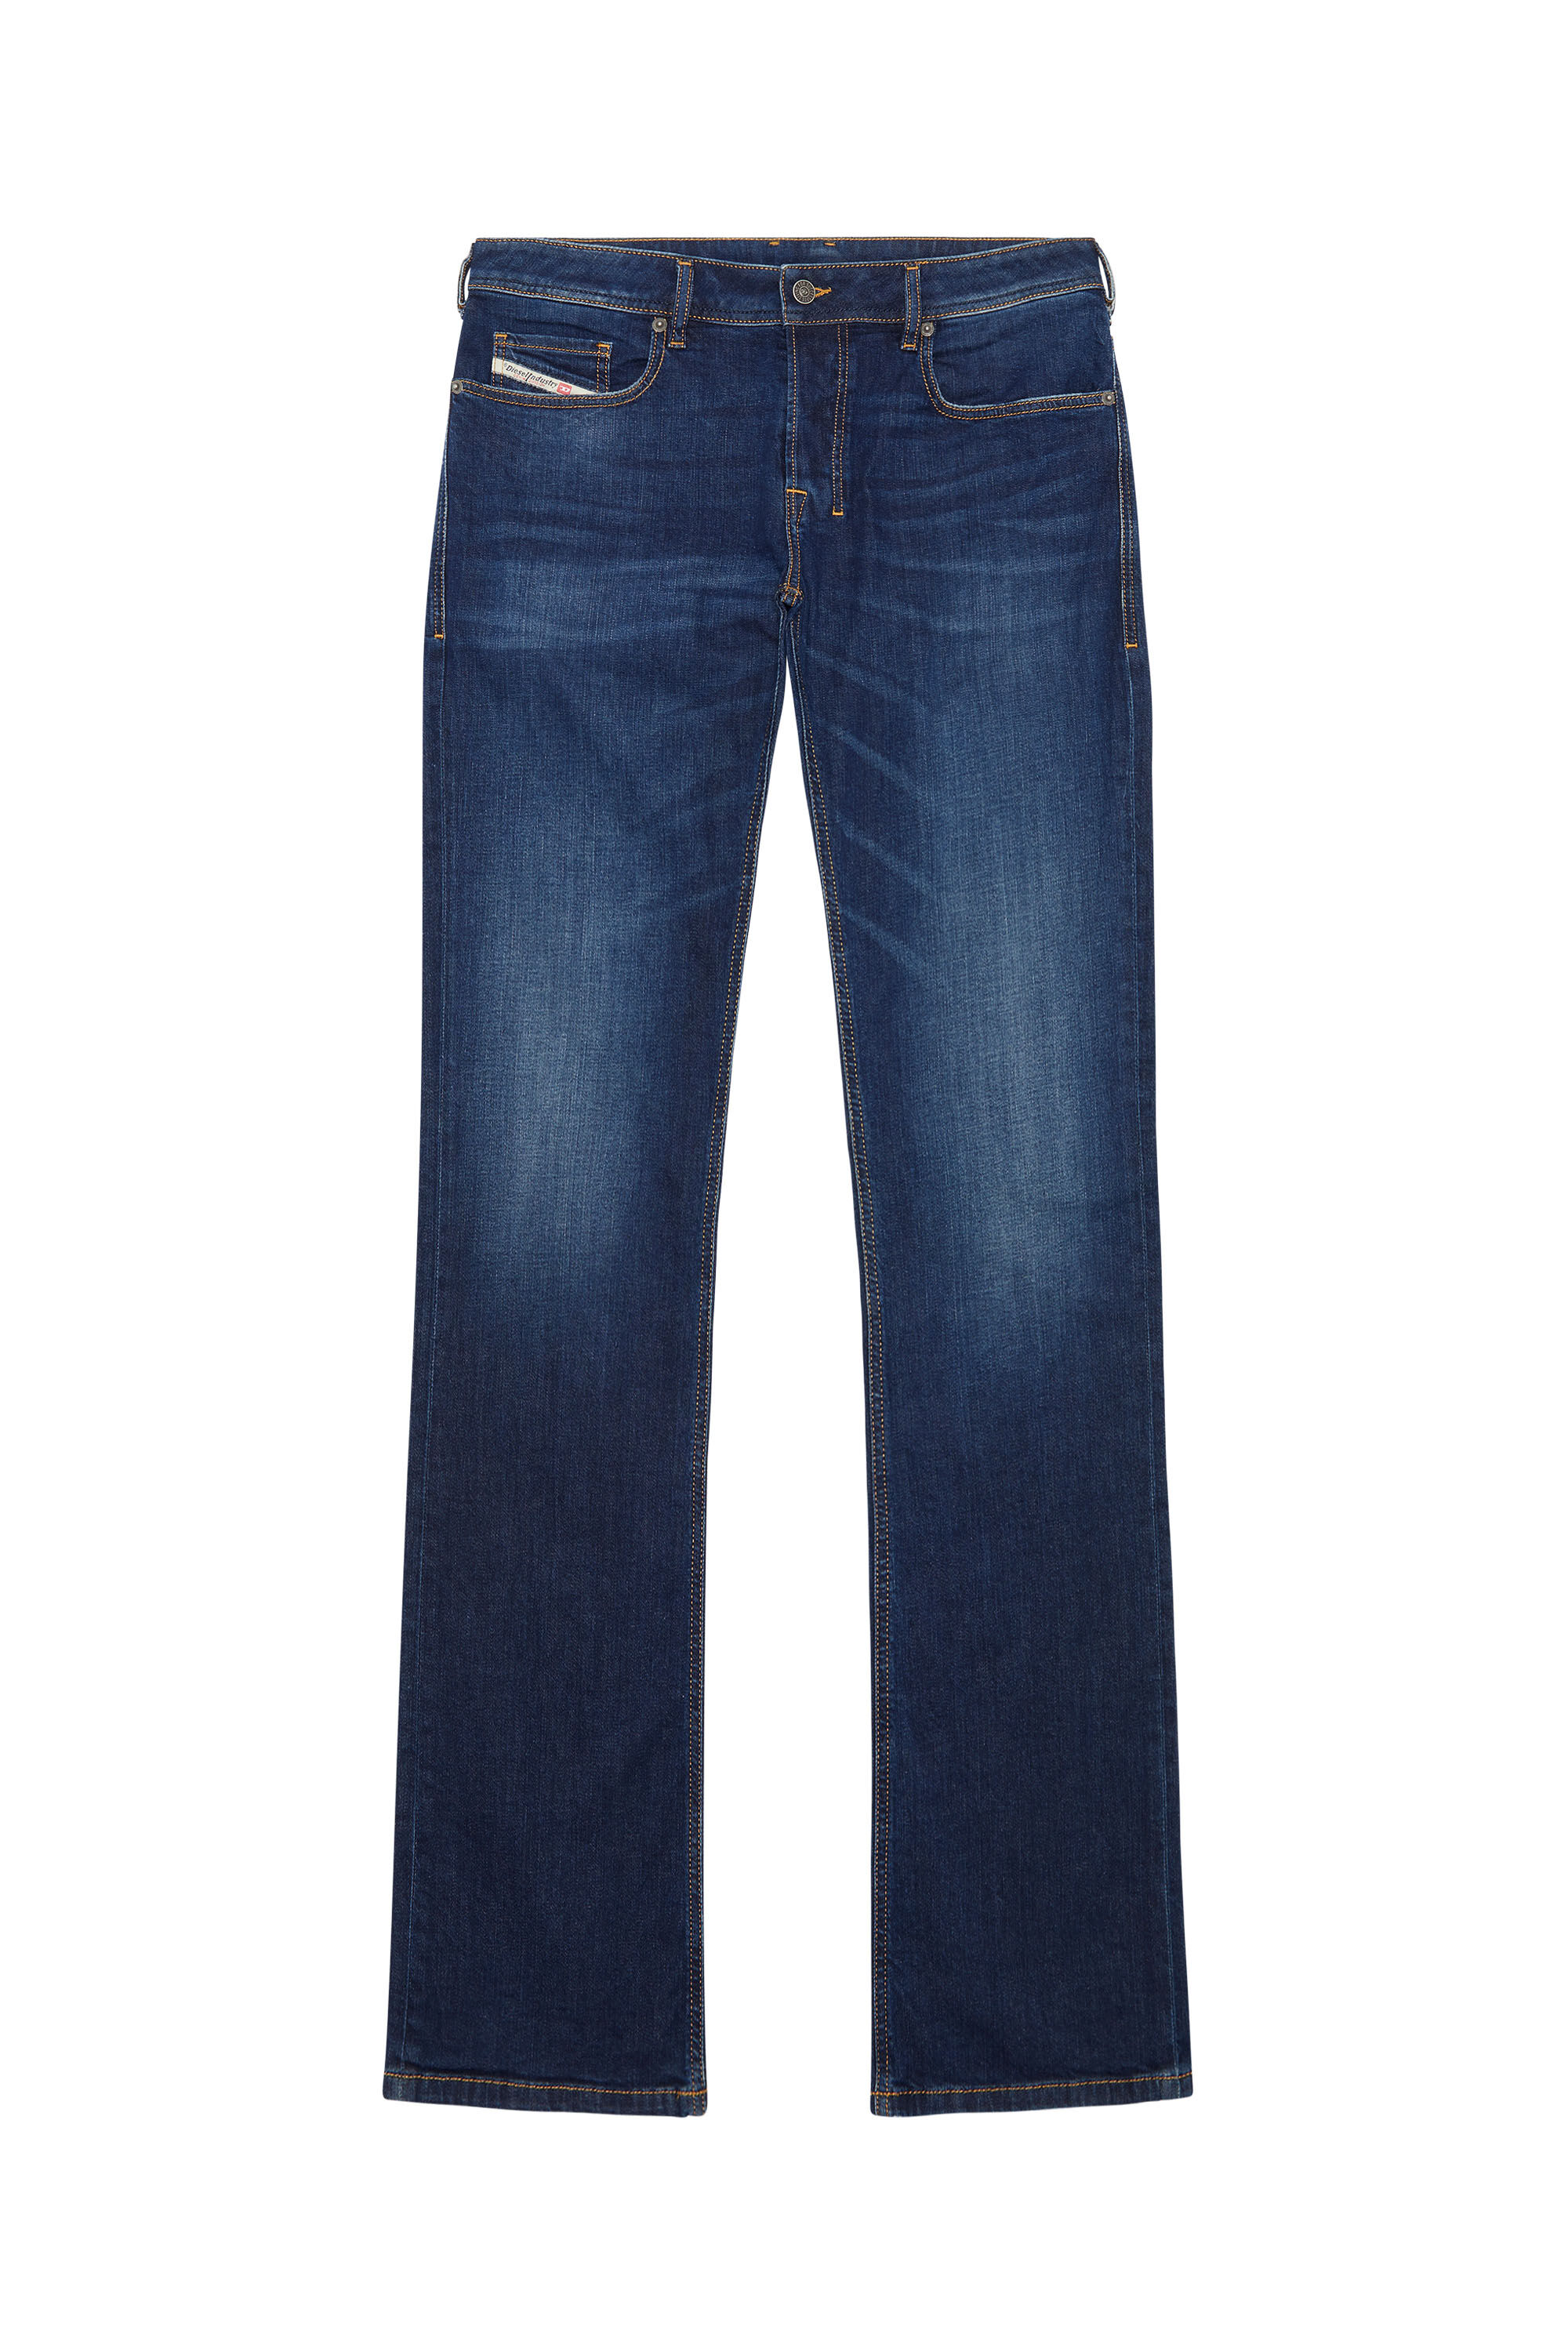 Diesel - Zatiny Bootcut Jeans 082AY,  - Image 2